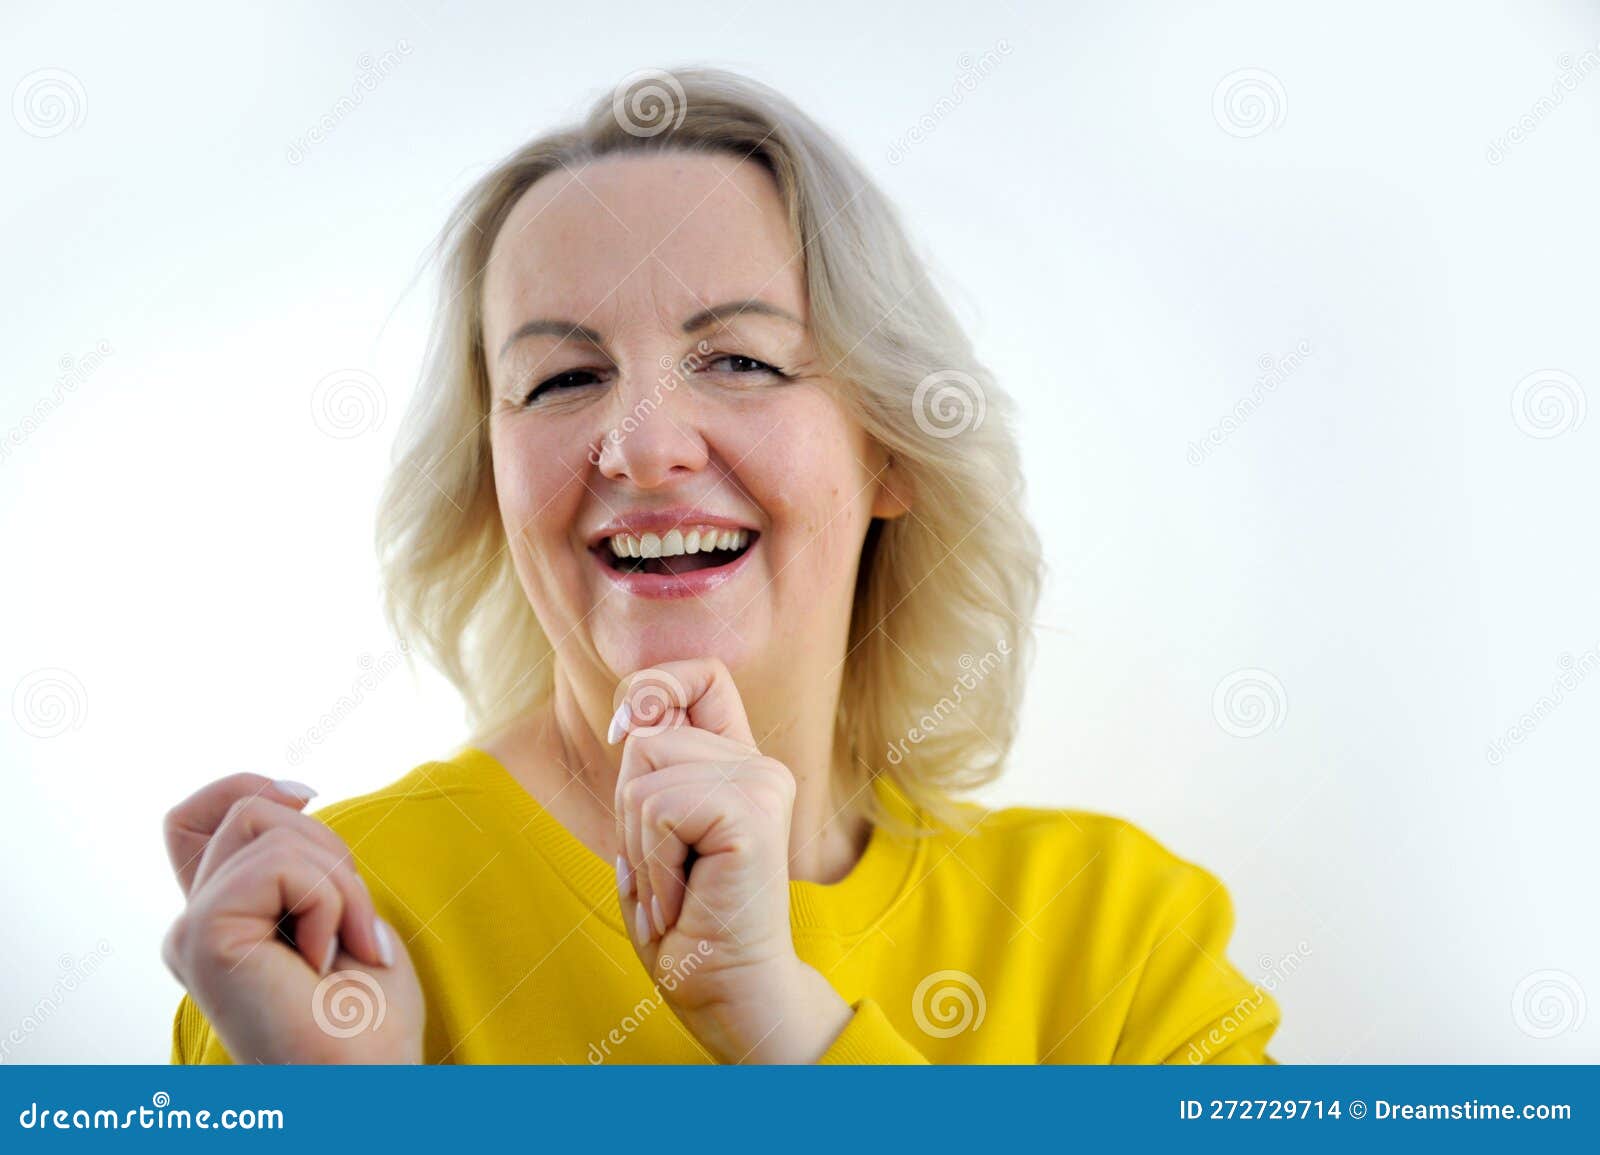 attractive woman wearing yellow t-shirt moving jumping forward with happy smiley face isolated on white background. High quality photo